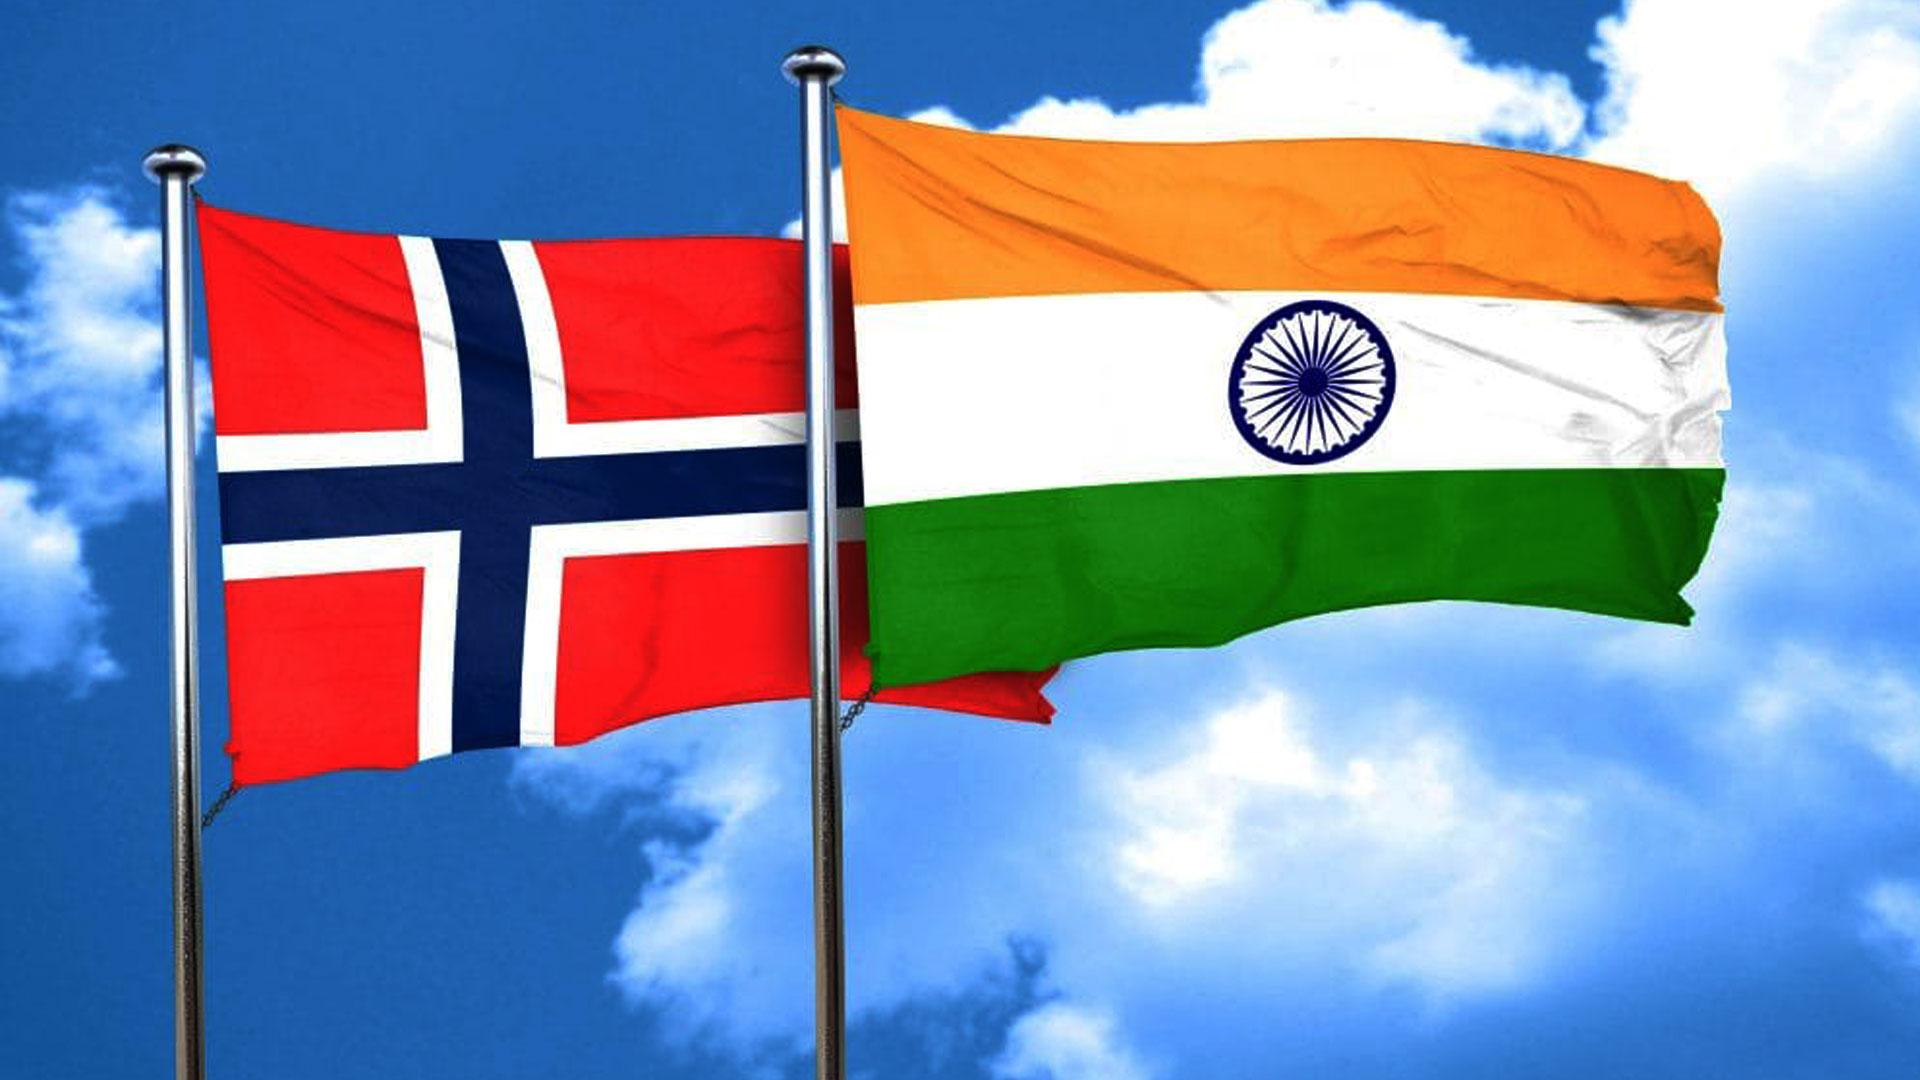 1ST SESSION OF INDIA – NORWAY DIALOGUE ON TRADE & INVESTMENT HELD IN NEW DELHI